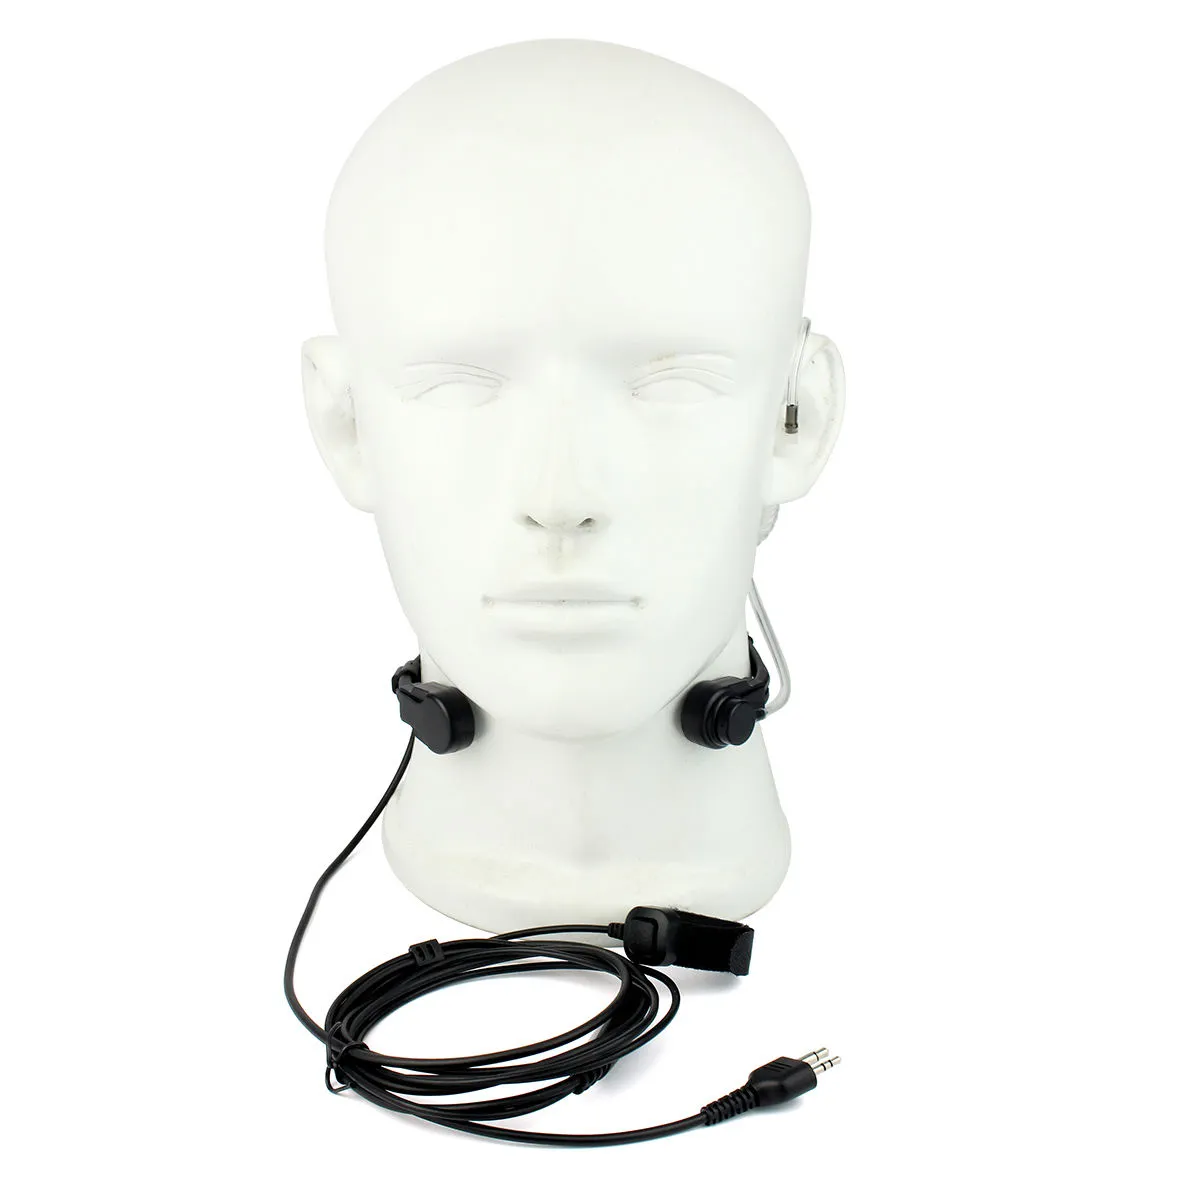 2PCS Midland Adjustable Throat Microphone with Acoustic Tube Finger PTT Earpiece